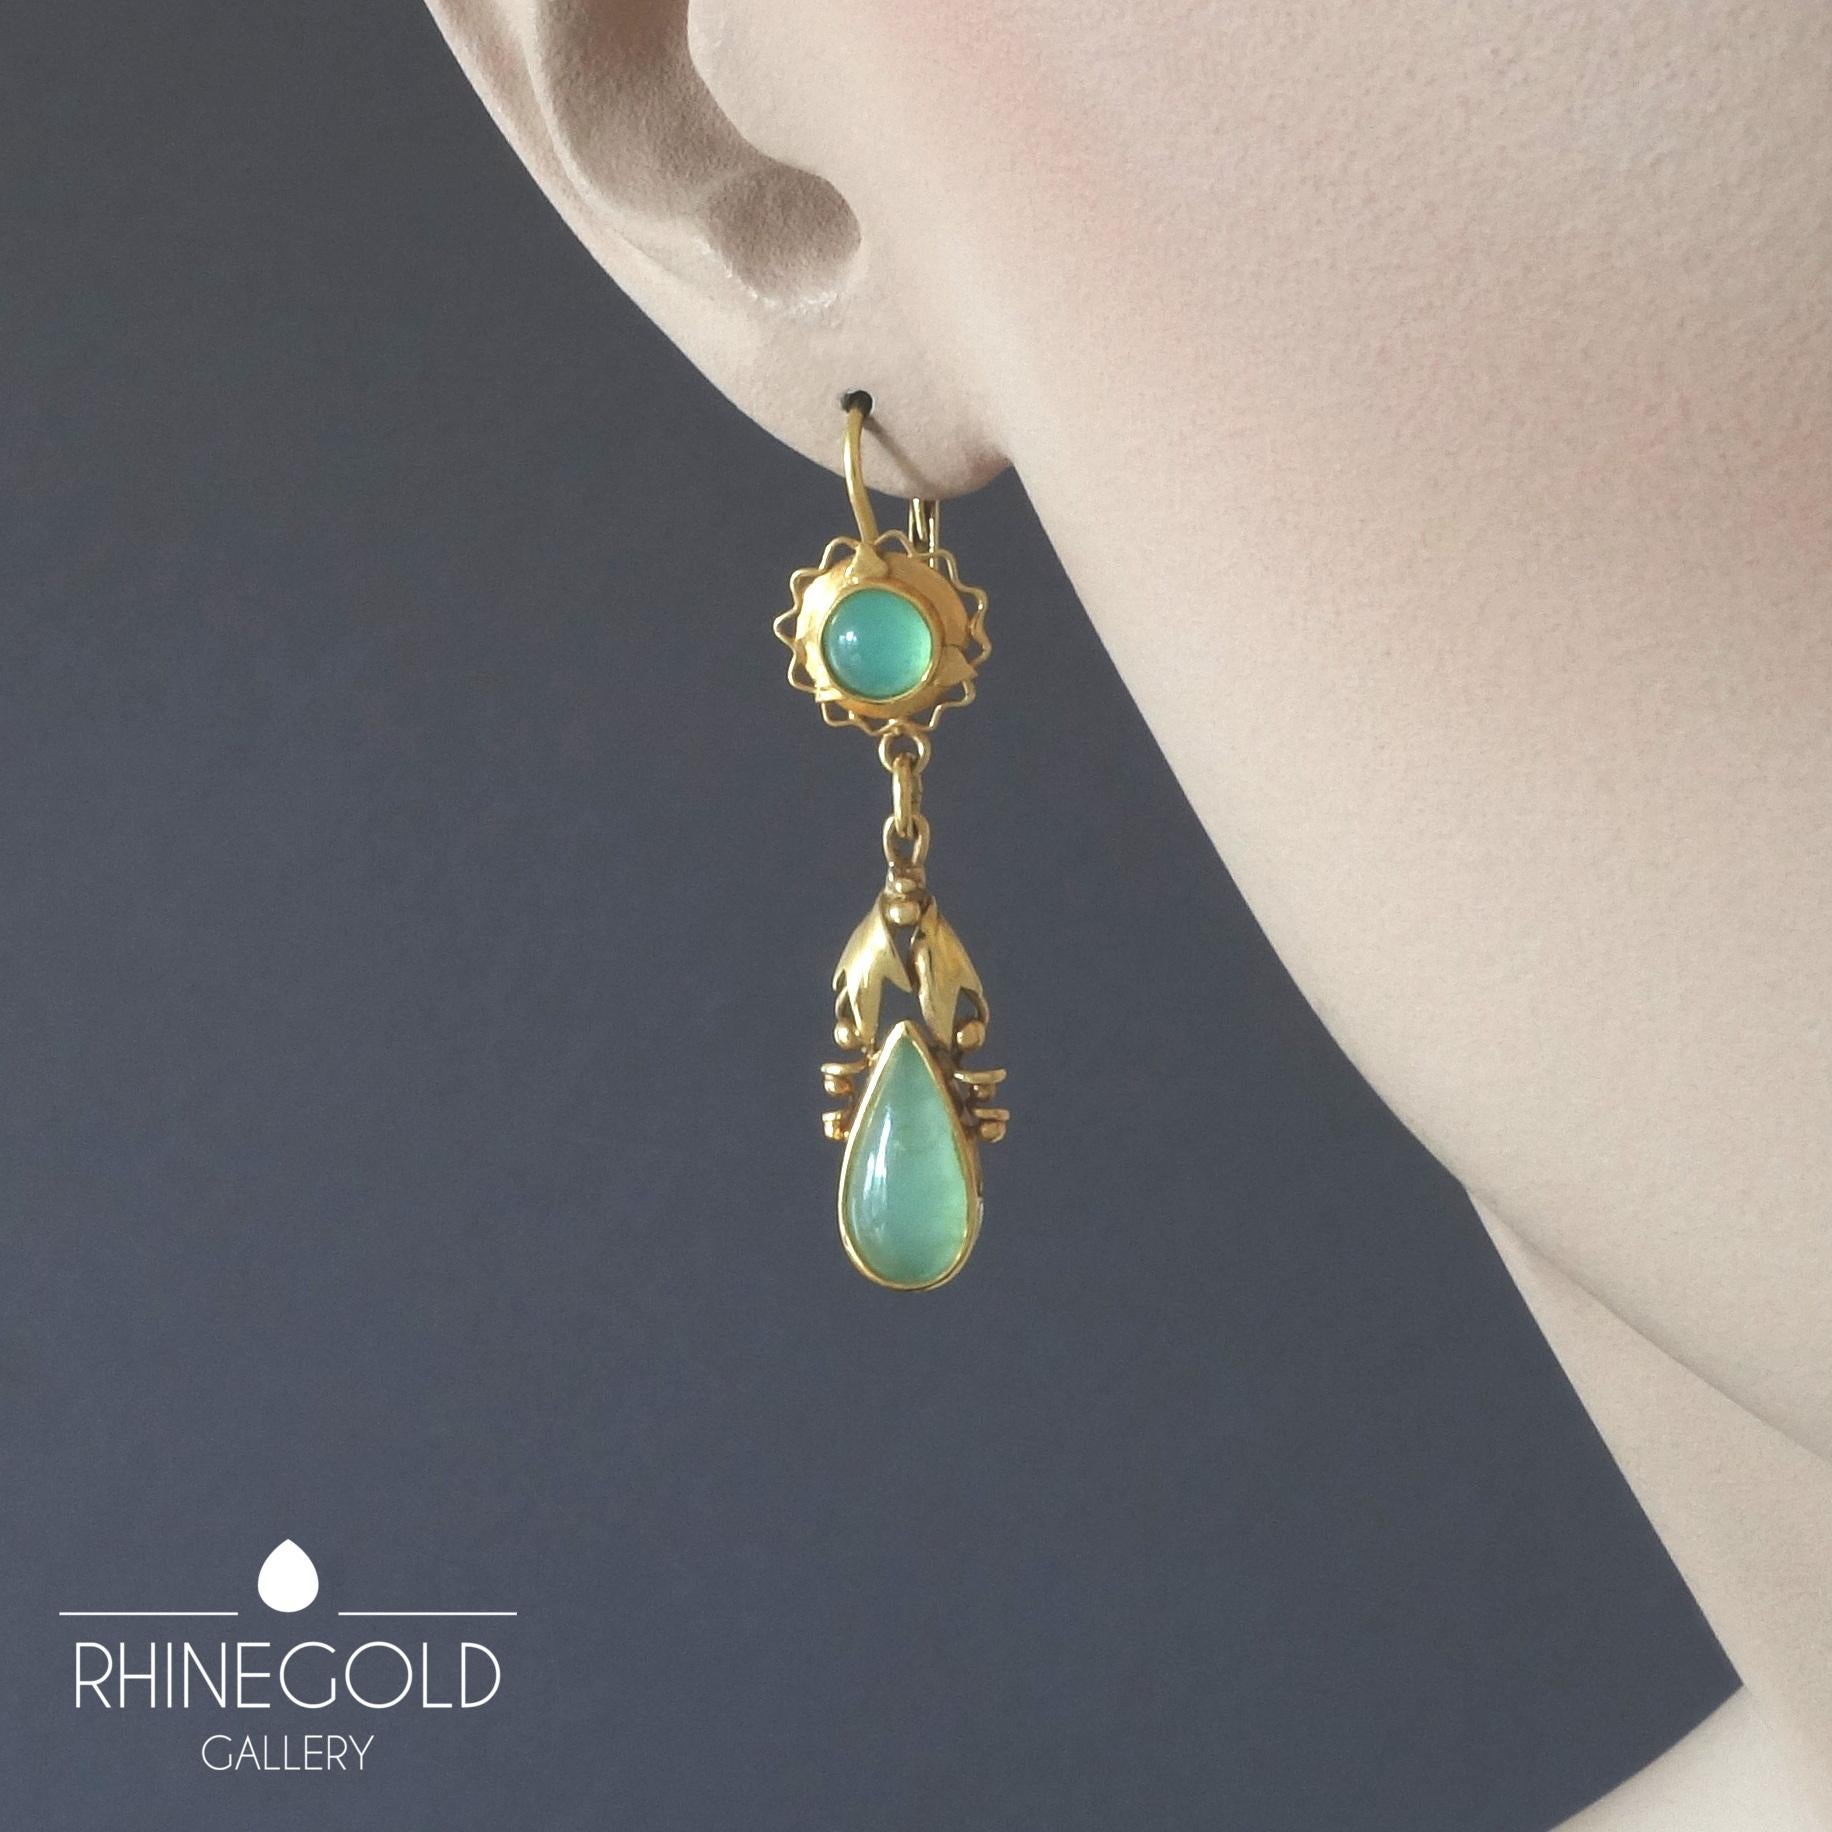 1920s 1930s Original Art Deco Jade Green Chrysoprase Gold Dangle Drop Earrings
14k yellow gold, chrysoprase
Length 4.9 cm, width 1.1 cm (approx. 1 7/8” by 7/16”)
Marks: none; all parts tested for 14k gold
Germany, 1920s – 1930s

 
